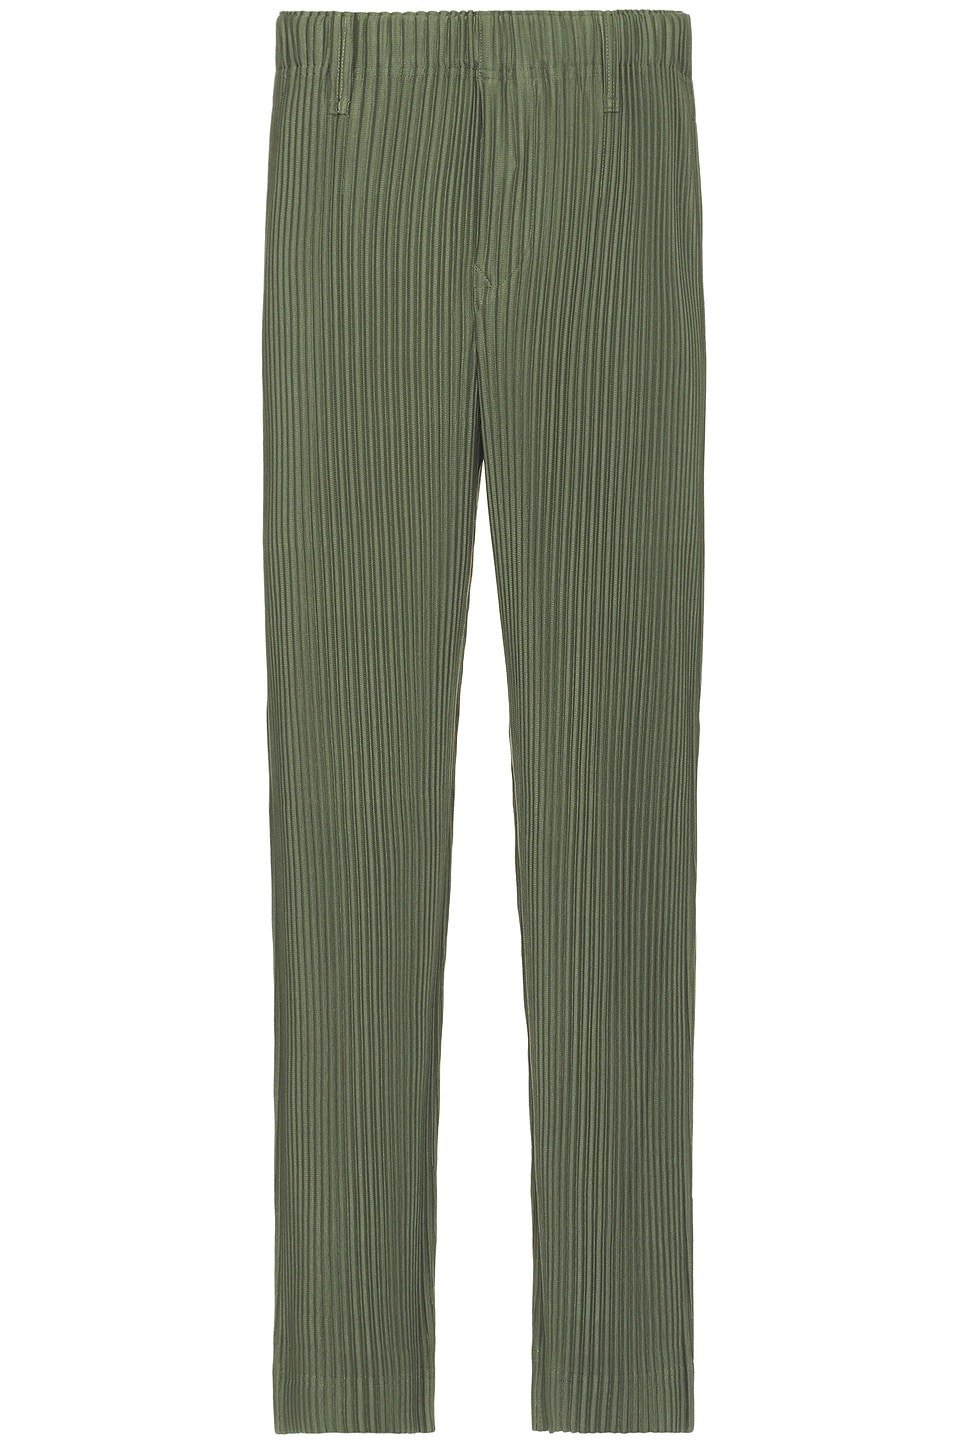 Image 1 of Homme Plisse Issey Miyake Color Pleated Pants in Sage Green